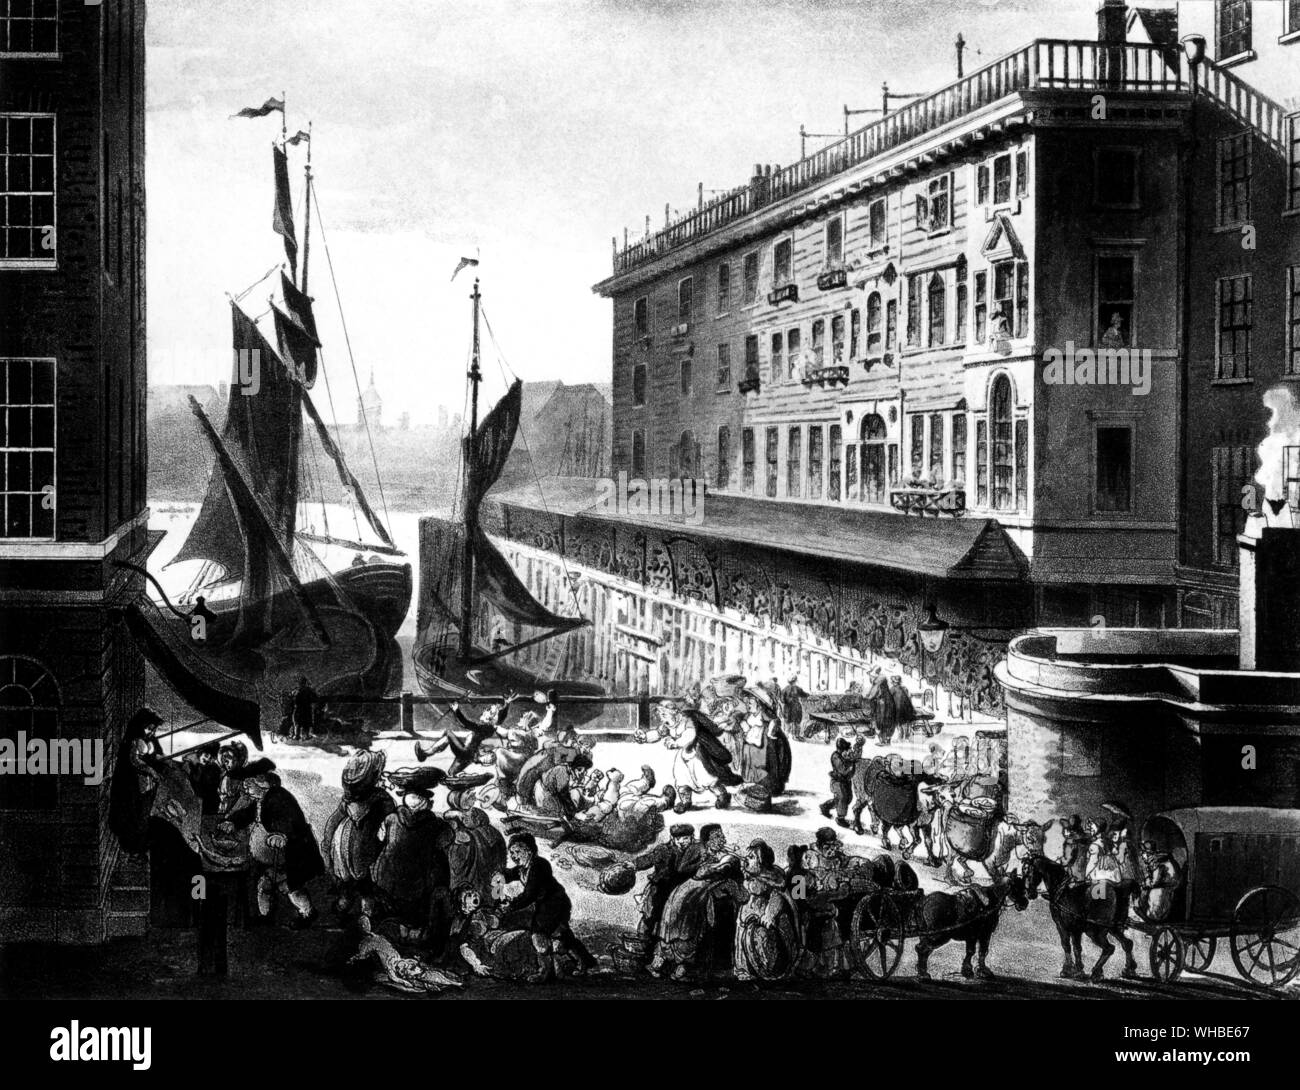 Billingsgate Market London 1808. Ackermann's Microcosm of London 1808-1811 by Thomas Rowlandson at Lyons. . The print shows two ships in dock, with people on the quay buying and selling fish, carrying baskets on their heads, arguing, falling over, herding laden donkeys and driving carriages. In the foreground a dog eats some fallen fish and a man administers tea to a woman who has collapsed on the ground. Stock Photo